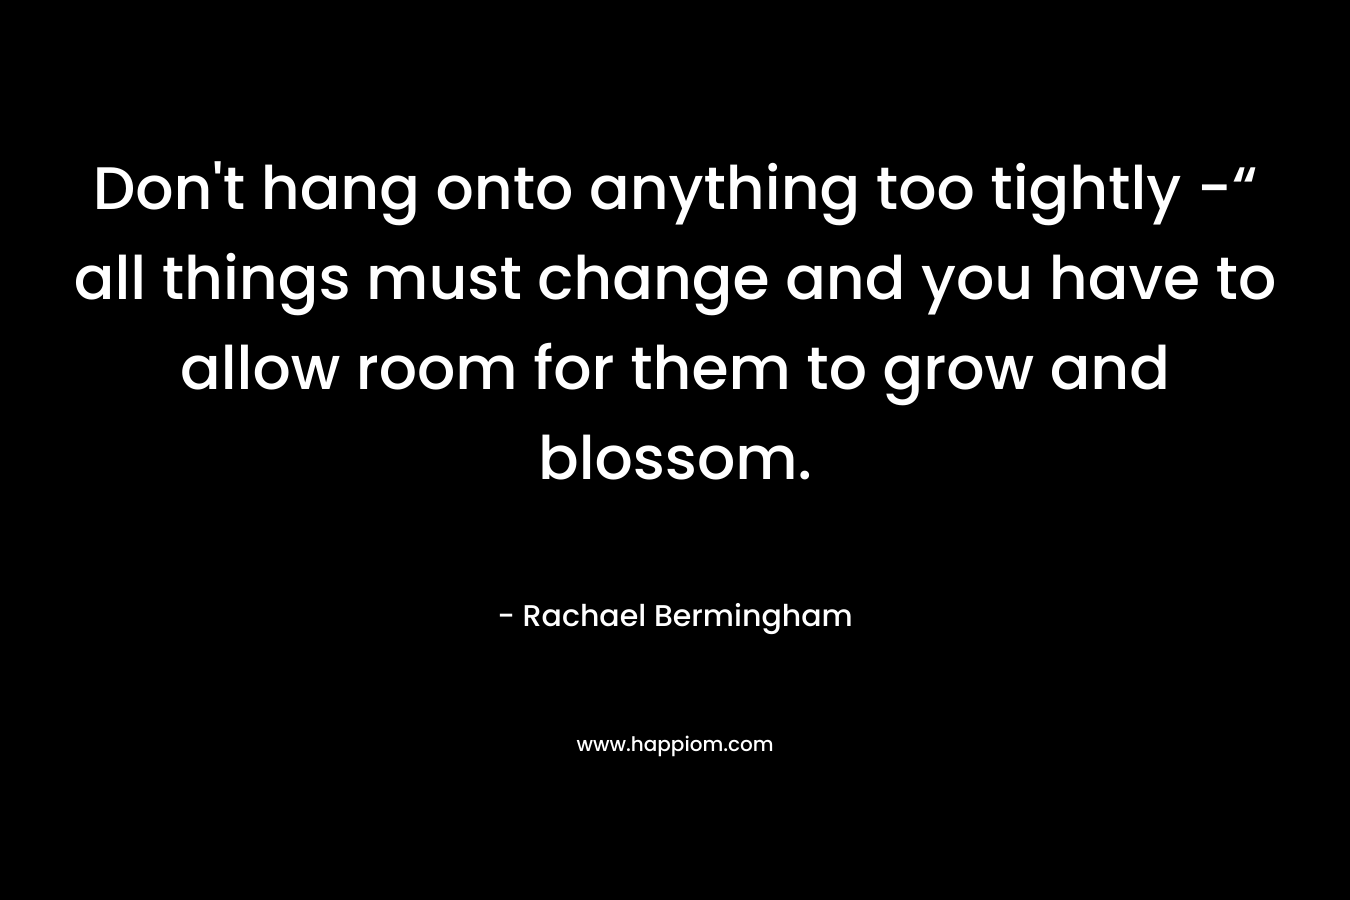 Don't hang onto anything too tightly -“ all things must change and you have to allow room for them to grow and blossom.